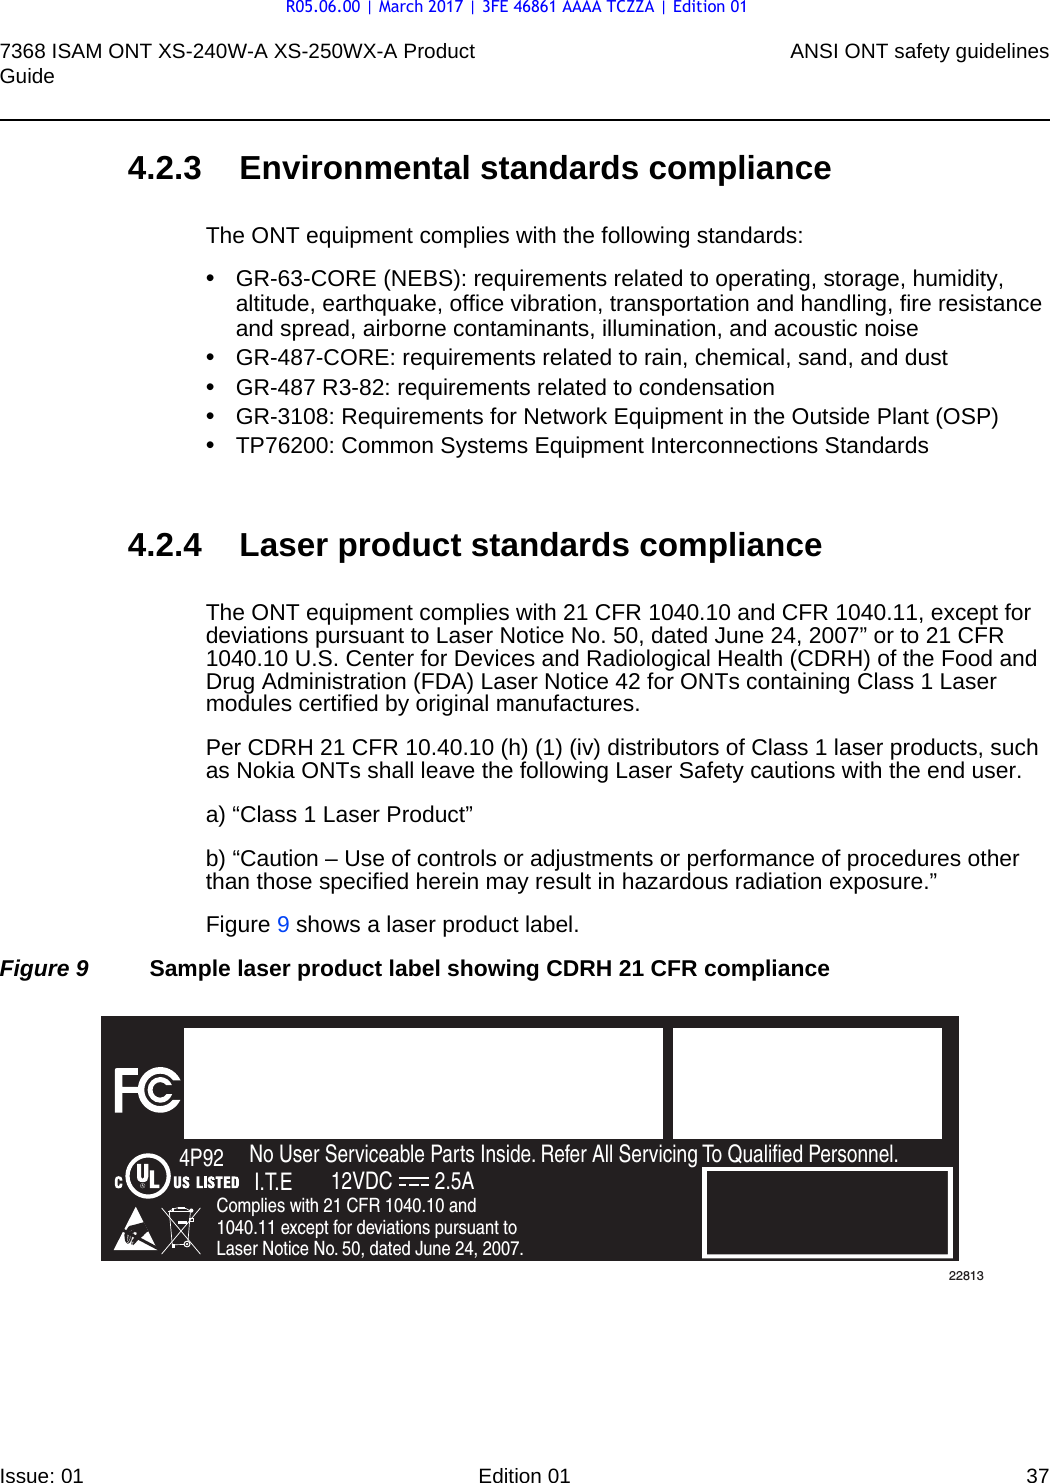 7368 ISAM ONT XS-240W-A XS-250WX-A Product Guide ANSI ONT safety guidelinesIssue: 01 Edition 01 37 4.2.3 Environmental standards complianceThe ONT equipment complies with the following standards:•GR-63-CORE (NEBS): requirements related to operating, storage, humidity, altitude, earthquake, office vibration, transportation and handling, fire resistance and spread, airborne contaminants, illumination, and acoustic noise•GR-487-CORE: requirements related to rain, chemical, sand, and dust•GR-487 R3-82: requirements related to condensation •GR-3108: Requirements for Network Equipment in the Outside Plant (OSP)•TP76200: Common Systems Equipment Interconnections Standards4.2.4 Laser product standards complianceThe ONT equipment complies with 21 CFR 1040.10 and CFR 1040.11, except for deviations pursuant to Laser Notice No. 50, dated June 24, 2007” or to 21 CFR 1040.10 U.S. Center for Devices and Radiological Health (CDRH) of the Food and Drug Administration (FDA) Laser Notice 42 for ONTs containing Class 1 Laser modules certified by original manufactures.Per CDRH 21 CFR 10.40.10 (h) (1) (iv) distributors of Class 1 laser products, such as Nokia ONTs shall leave the following Laser Safety cautions with the end user.a) “Class 1 Laser Product”b) “Caution – Use of controls or adjustments or performance of procedures other than those specified herein may result in hazardous radiation exposure.”Figure 9 shows a laser product label.Figure 9 Sample laser product label showing CDRH 21 CFR complianceFiOS EnabledTo Order FiOS: 888 GET-FiOSor visit Verizon.comFor Service: 888 553-15552301 Sugar Bush Rd.Raleigh, NC 27612No User Serviceable Parts Inside. Refer All Servicing To Qualified Personnel.Complies with 21 CFR 1040.10 and 1040.11 except for deviations pursuant to Laser Notice No. 50, dated June 24, 2007.4P92I.T.E 12VDC 2.5A22813R05.06.00 | March 2017 | 3FE 46861 AAAA TCZZA | Edition 01